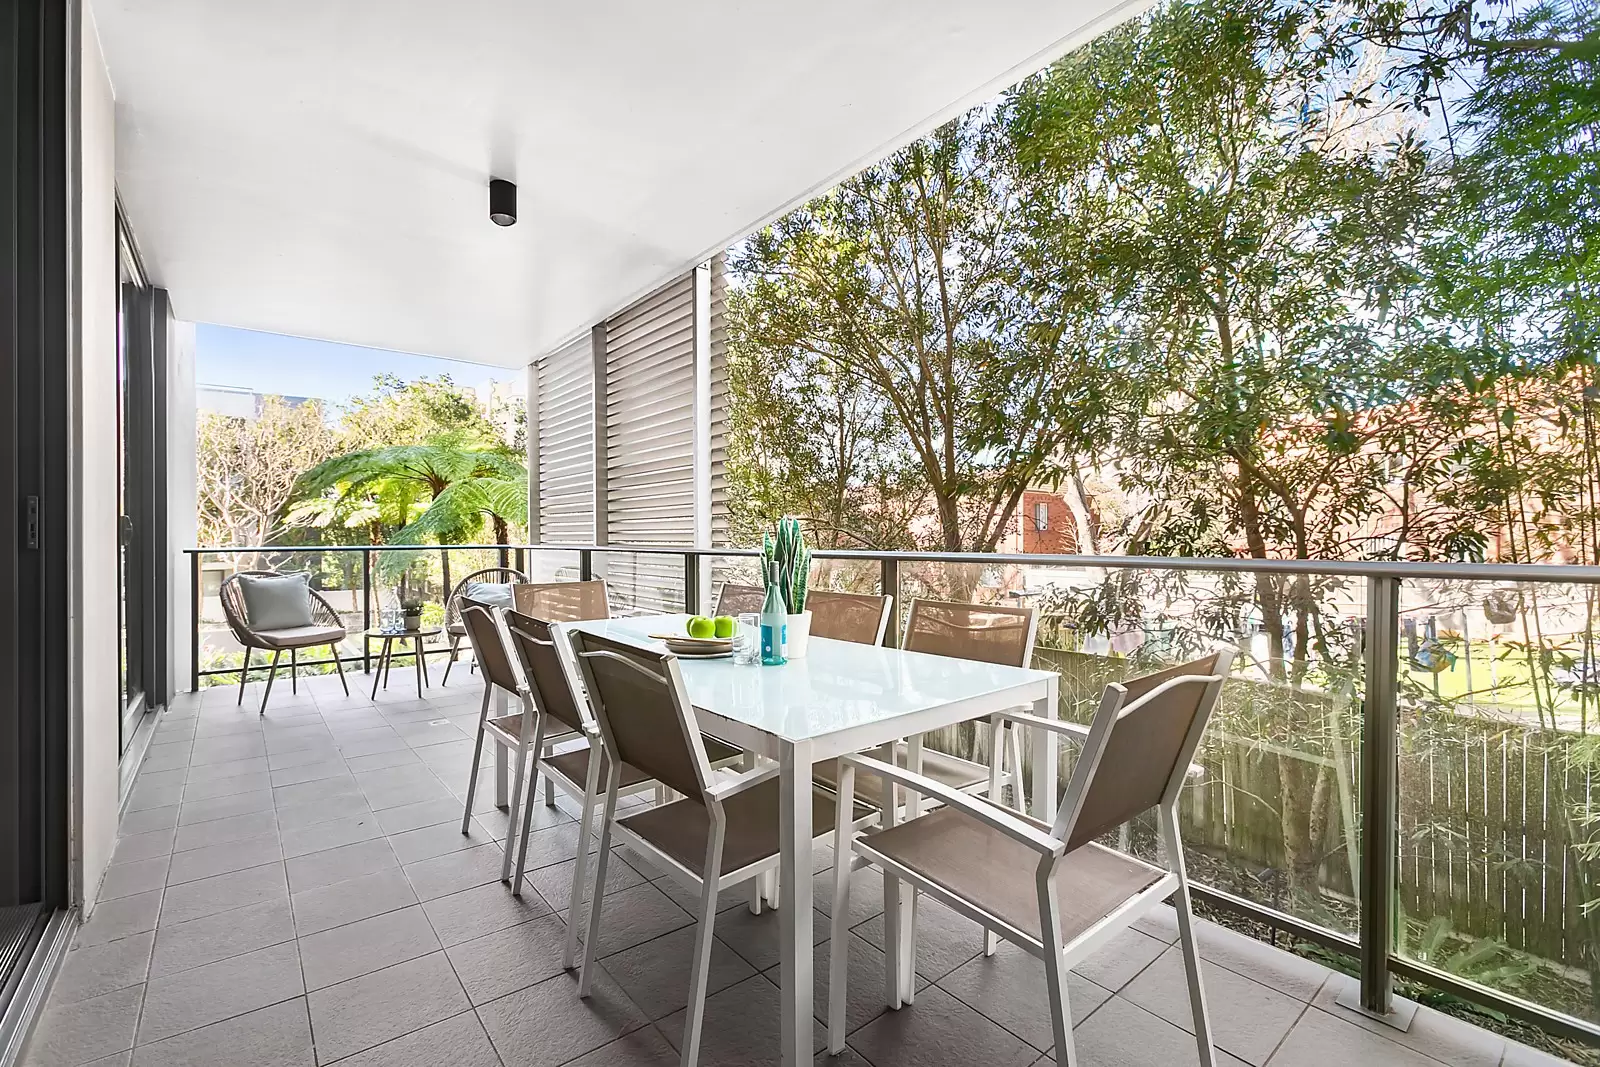 Photo #4: B206/106 Brook Street, Coogee - Sold by Sydney Sotheby's International Realty